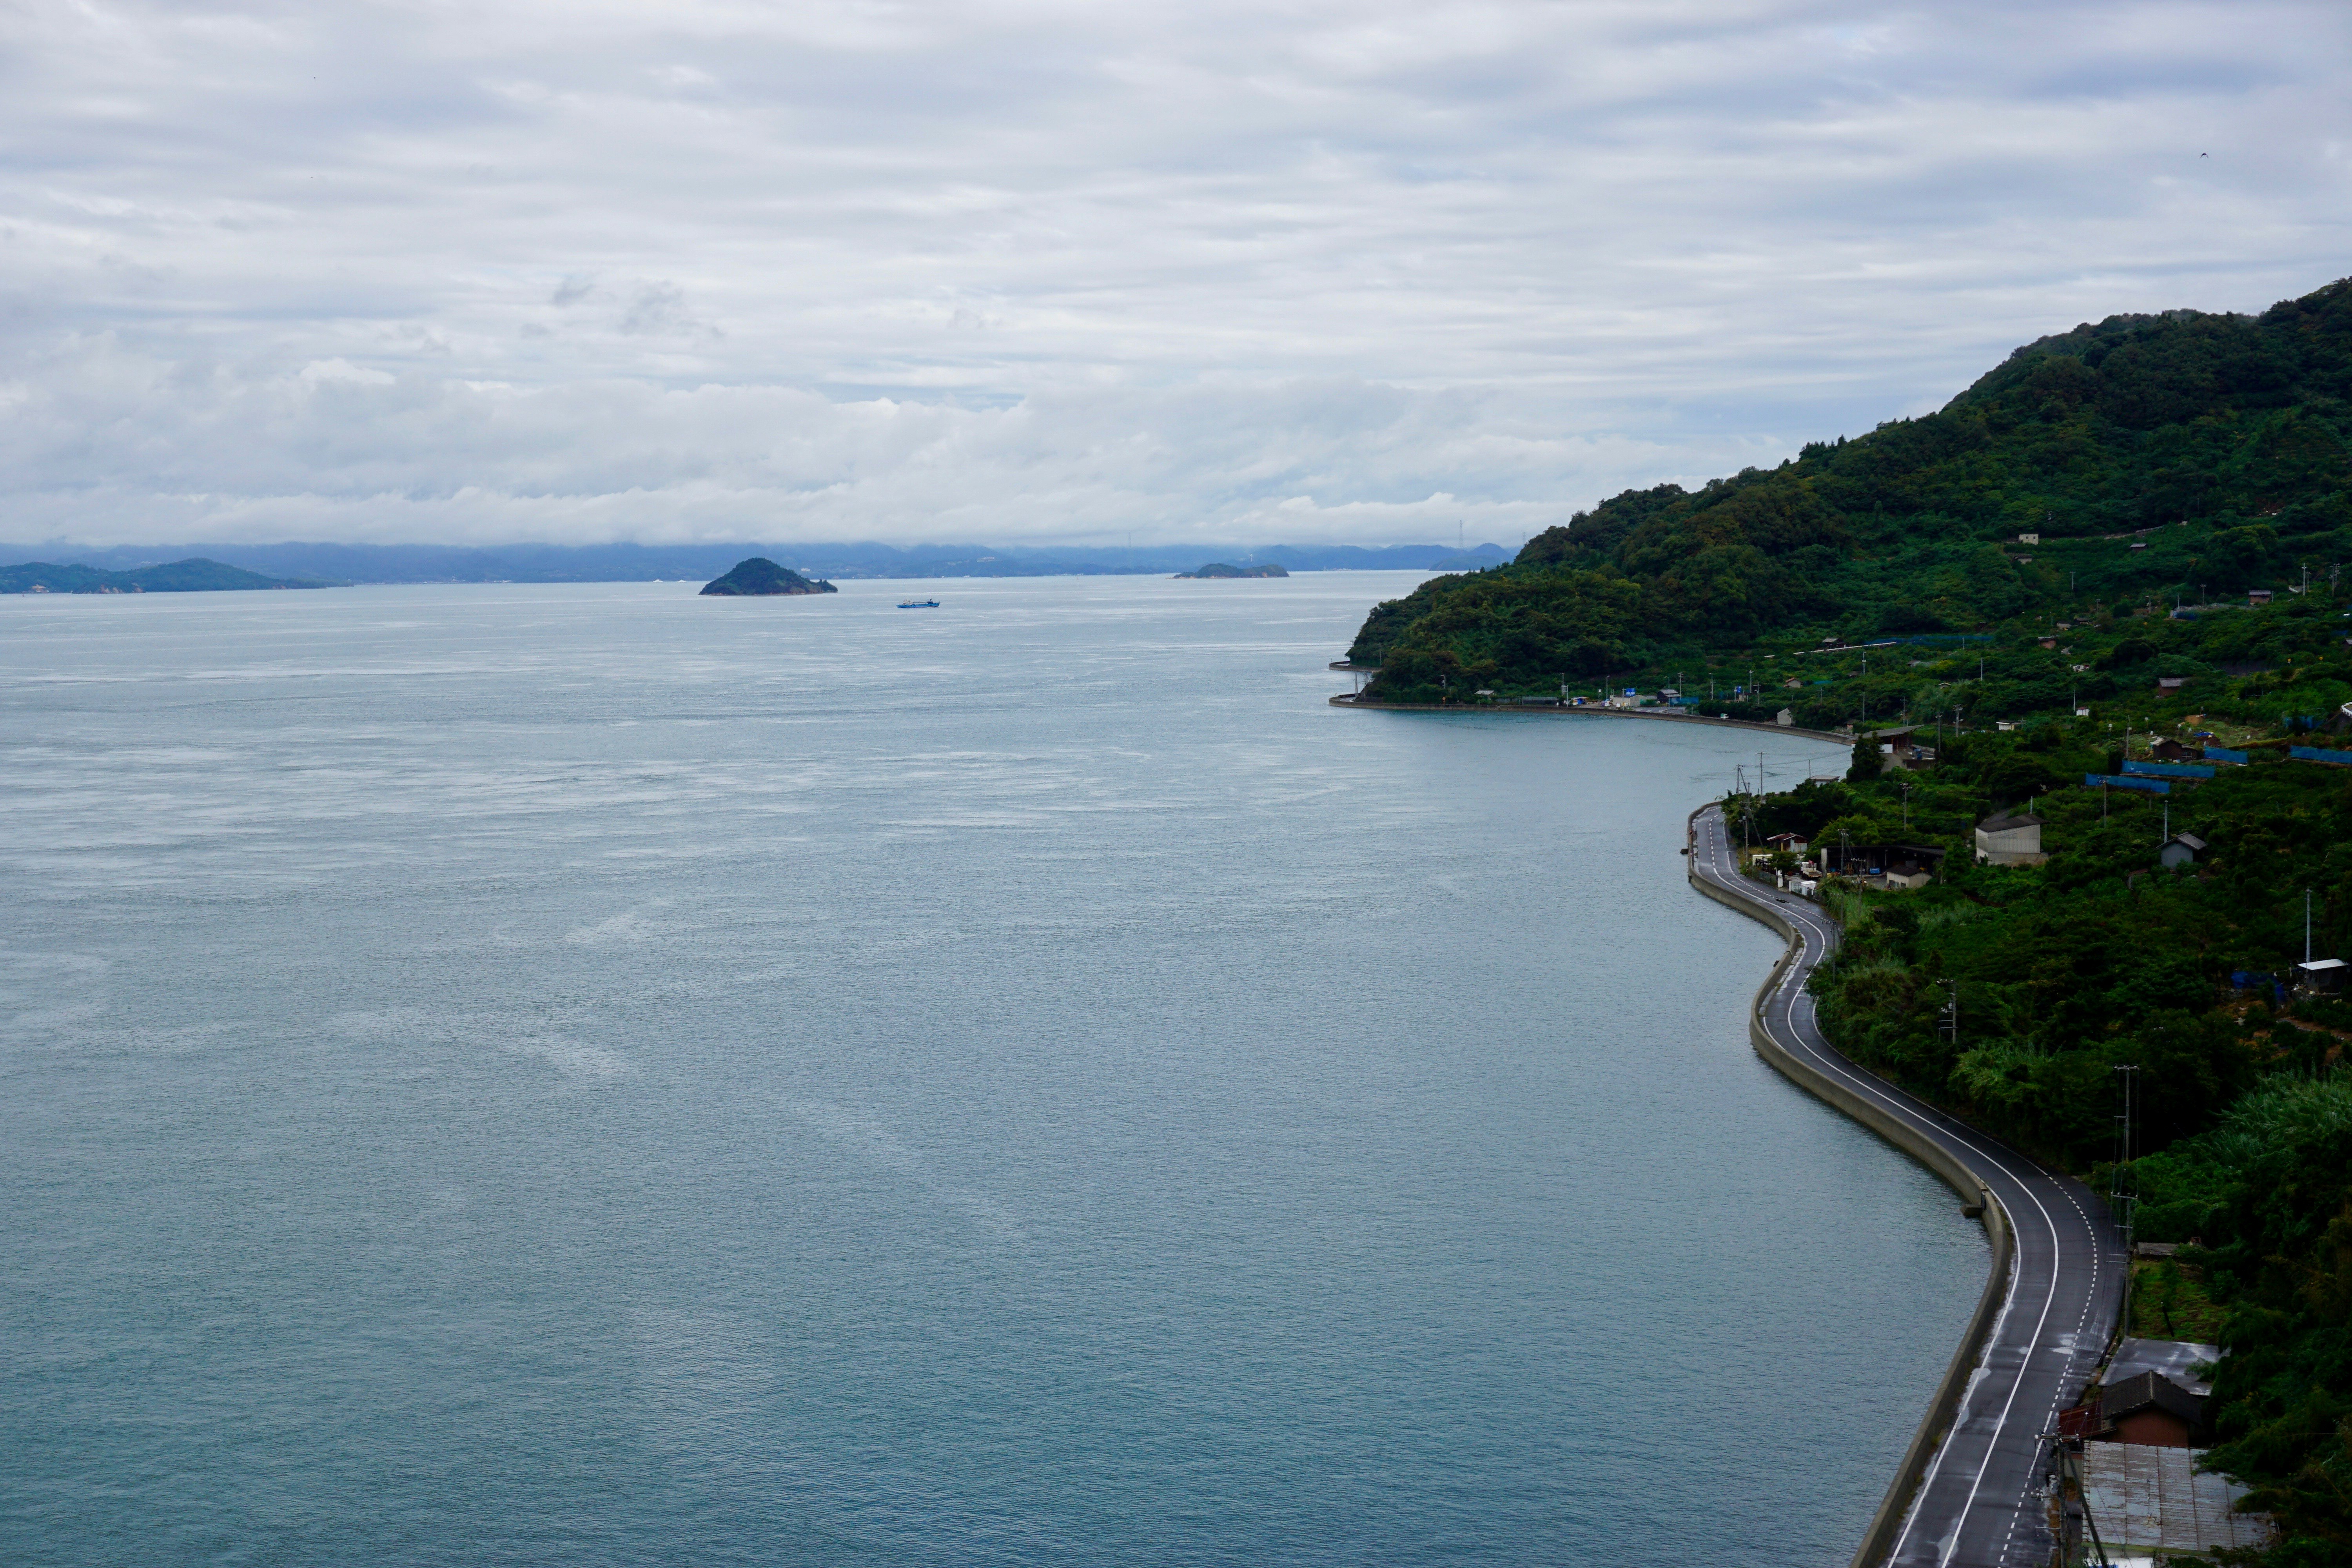 A black paved road with a white middle line highlights the winding coastline of Toyoshima. The green, thickly vegetated hills of the island come right up to the stone-washed denim sea. In the distance, a long line of low mountains follows the horizon with a white, spun-sugar cloud running parallel. A couple mounded islands stick up out of the ocean.